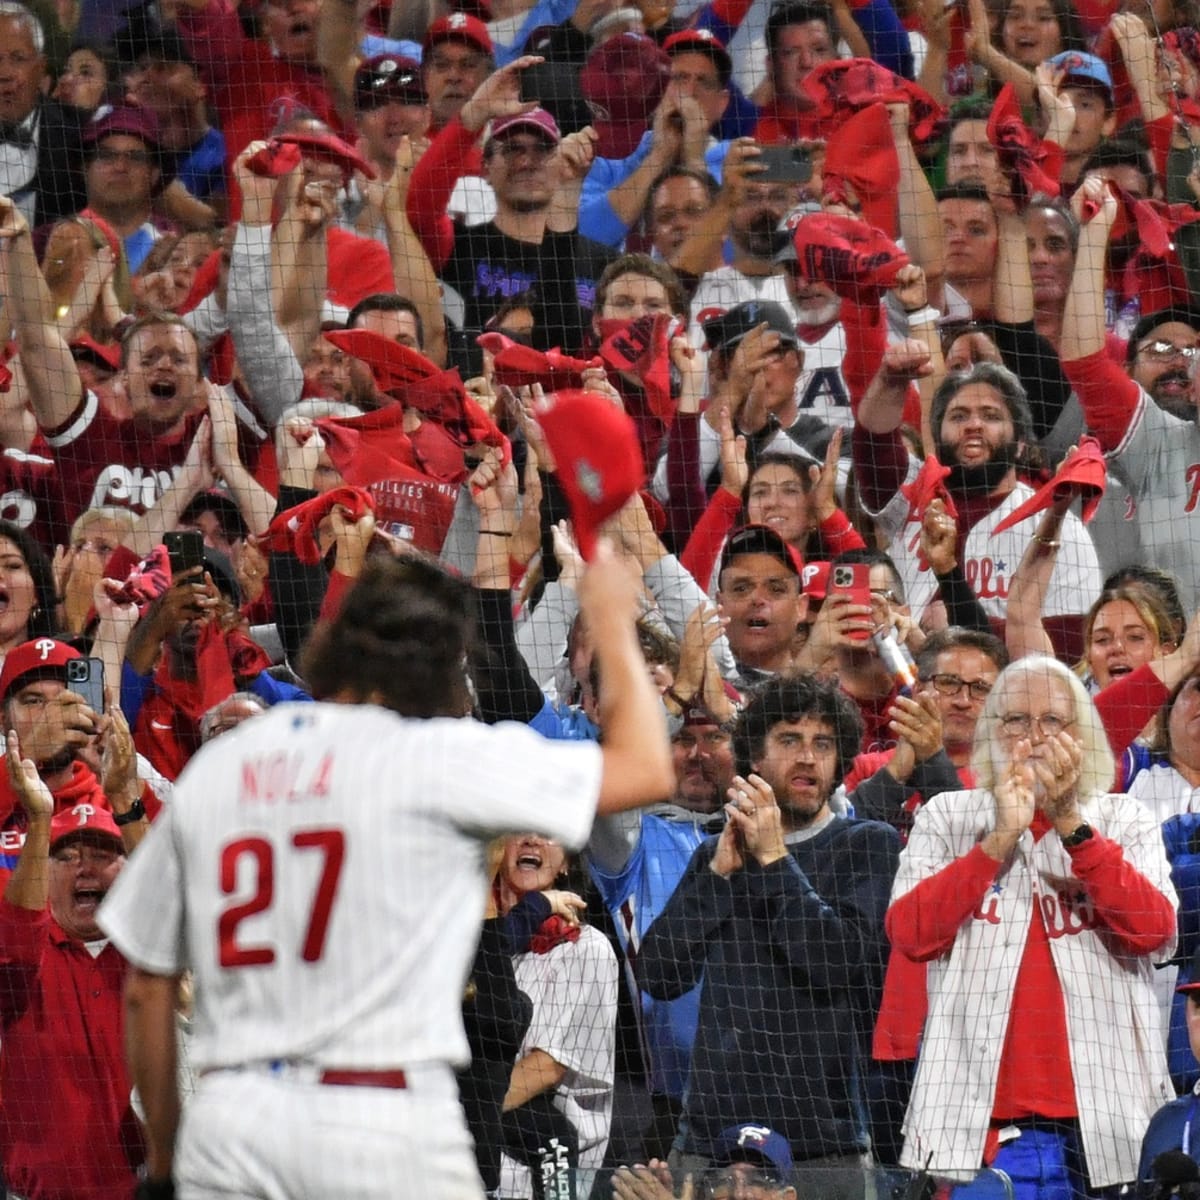 Phillies vs. D-backs NLCS tickets: Here's where to buy them for